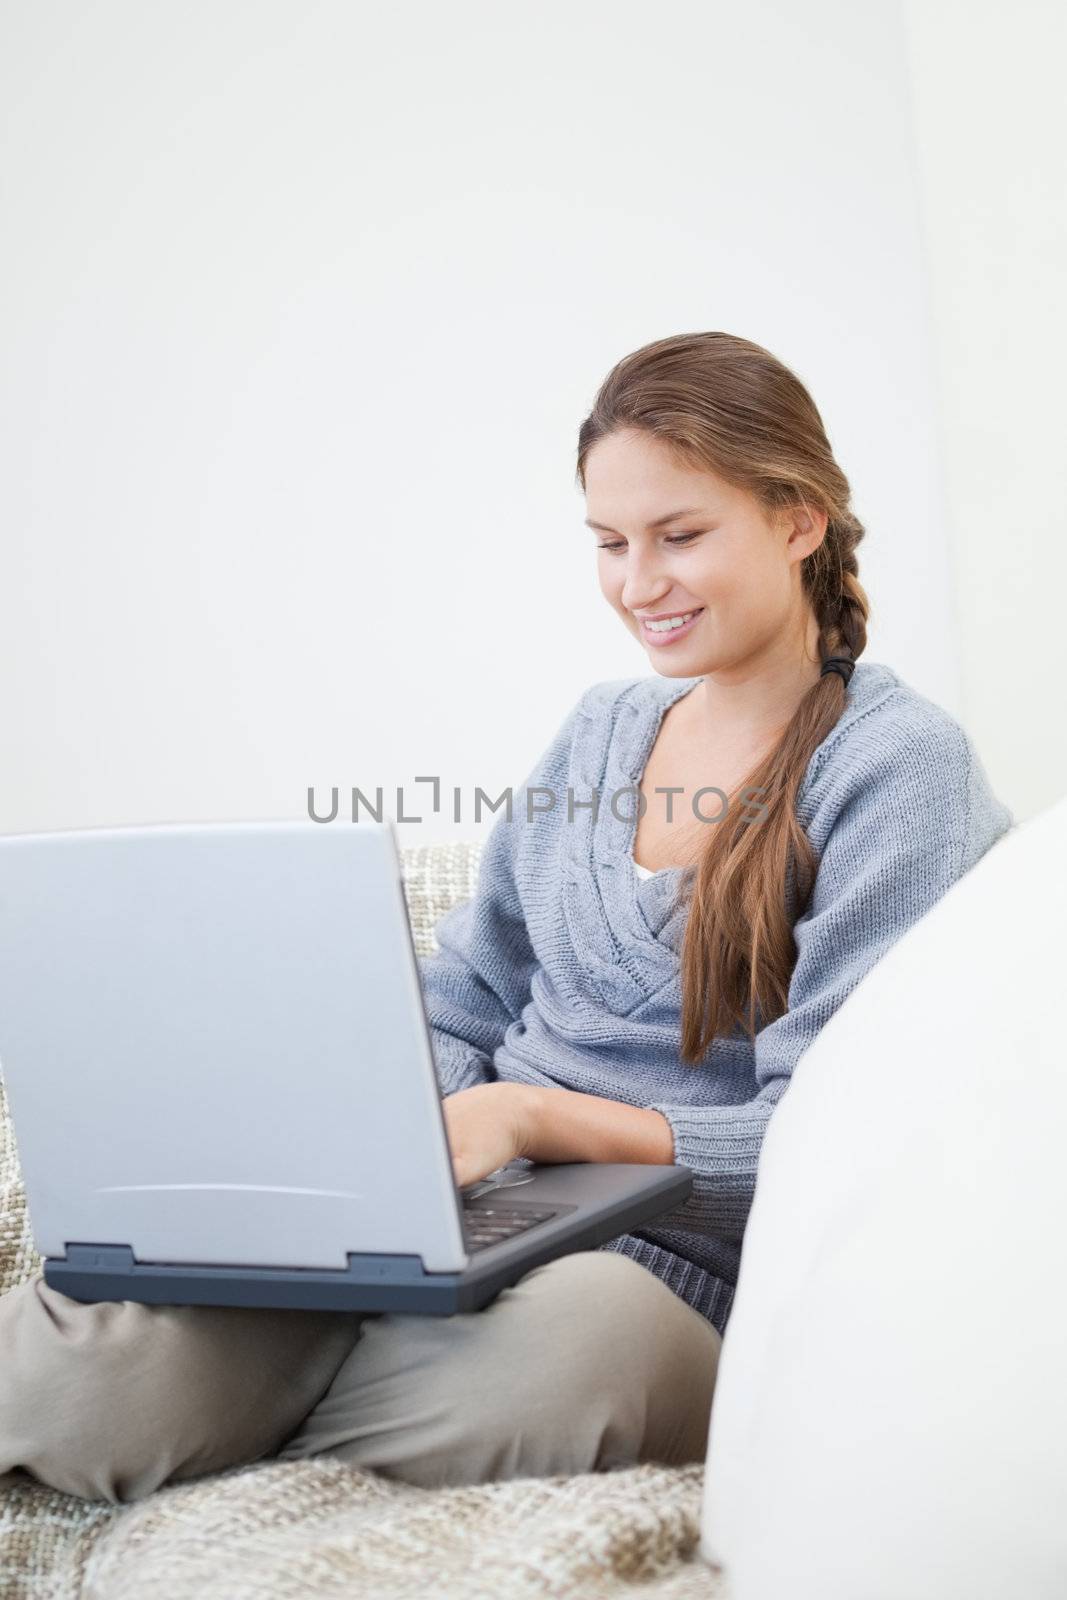 Women sitting while using a laptop in a sitting room